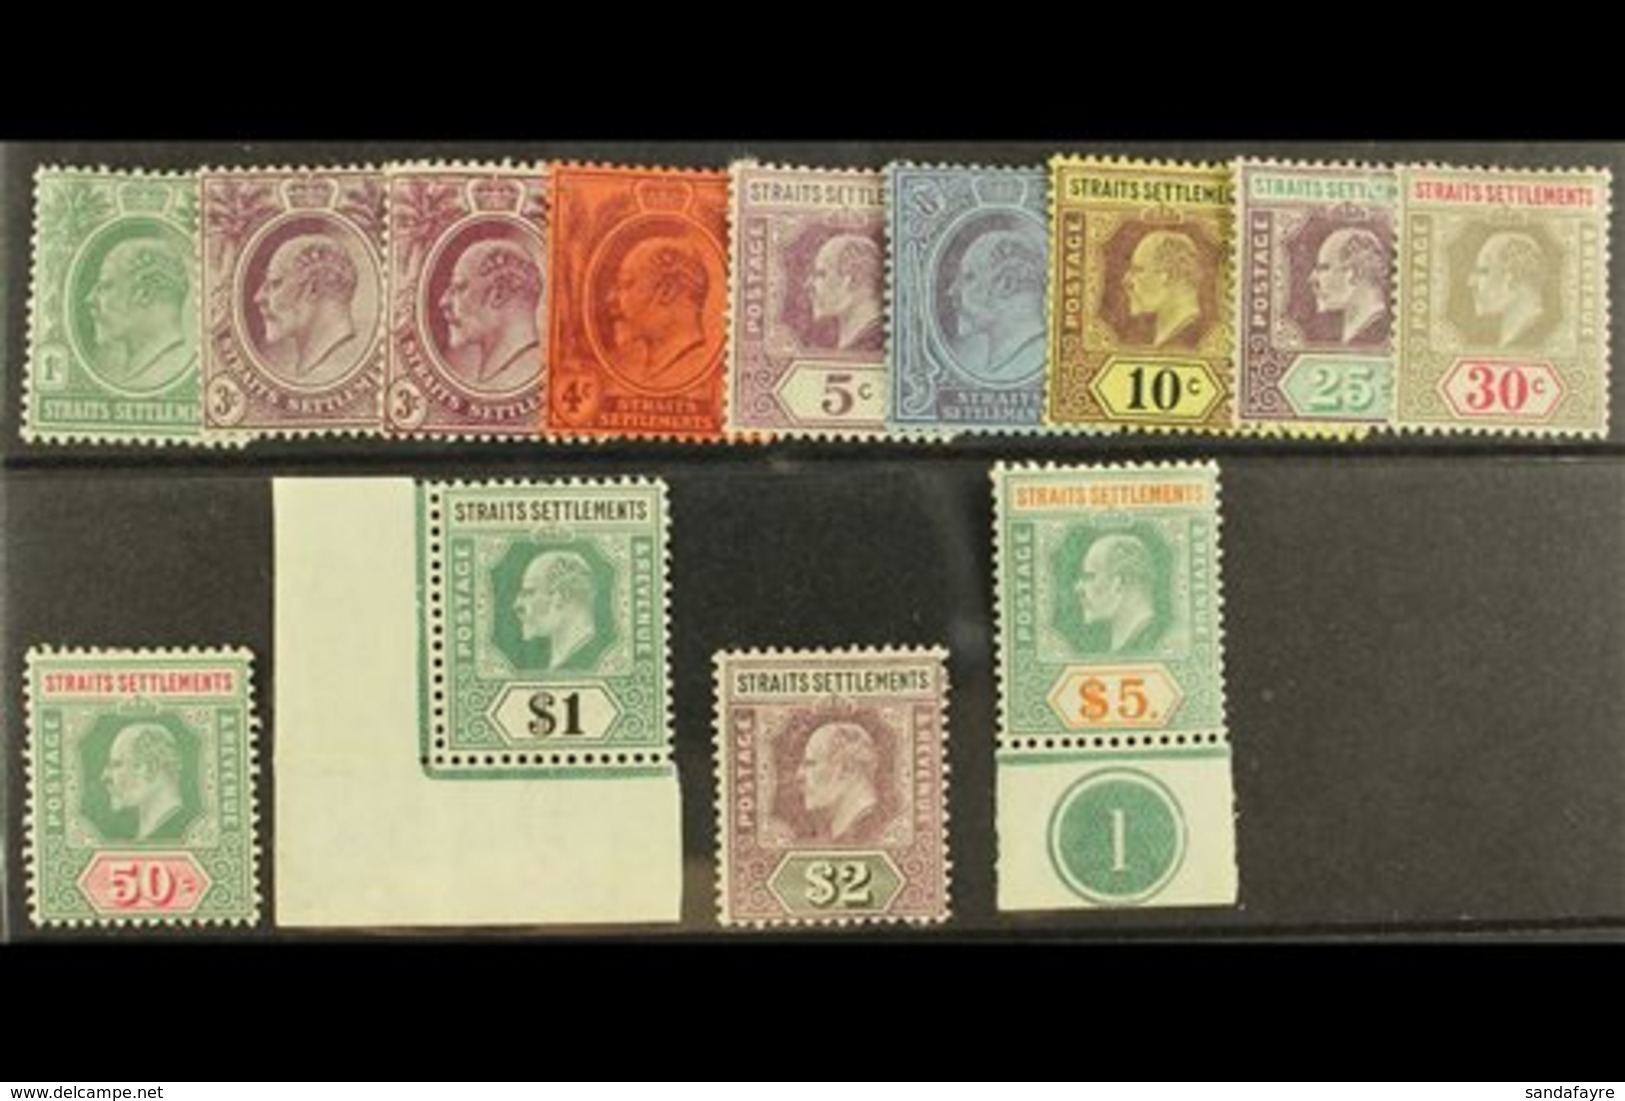 1904-10 Complete MCA Set, SG 127/138a, Plus 3c Plum Shade, The 25c With A Tear, Otherwise Fine Mint, The $5 With Margina - Straits Settlements